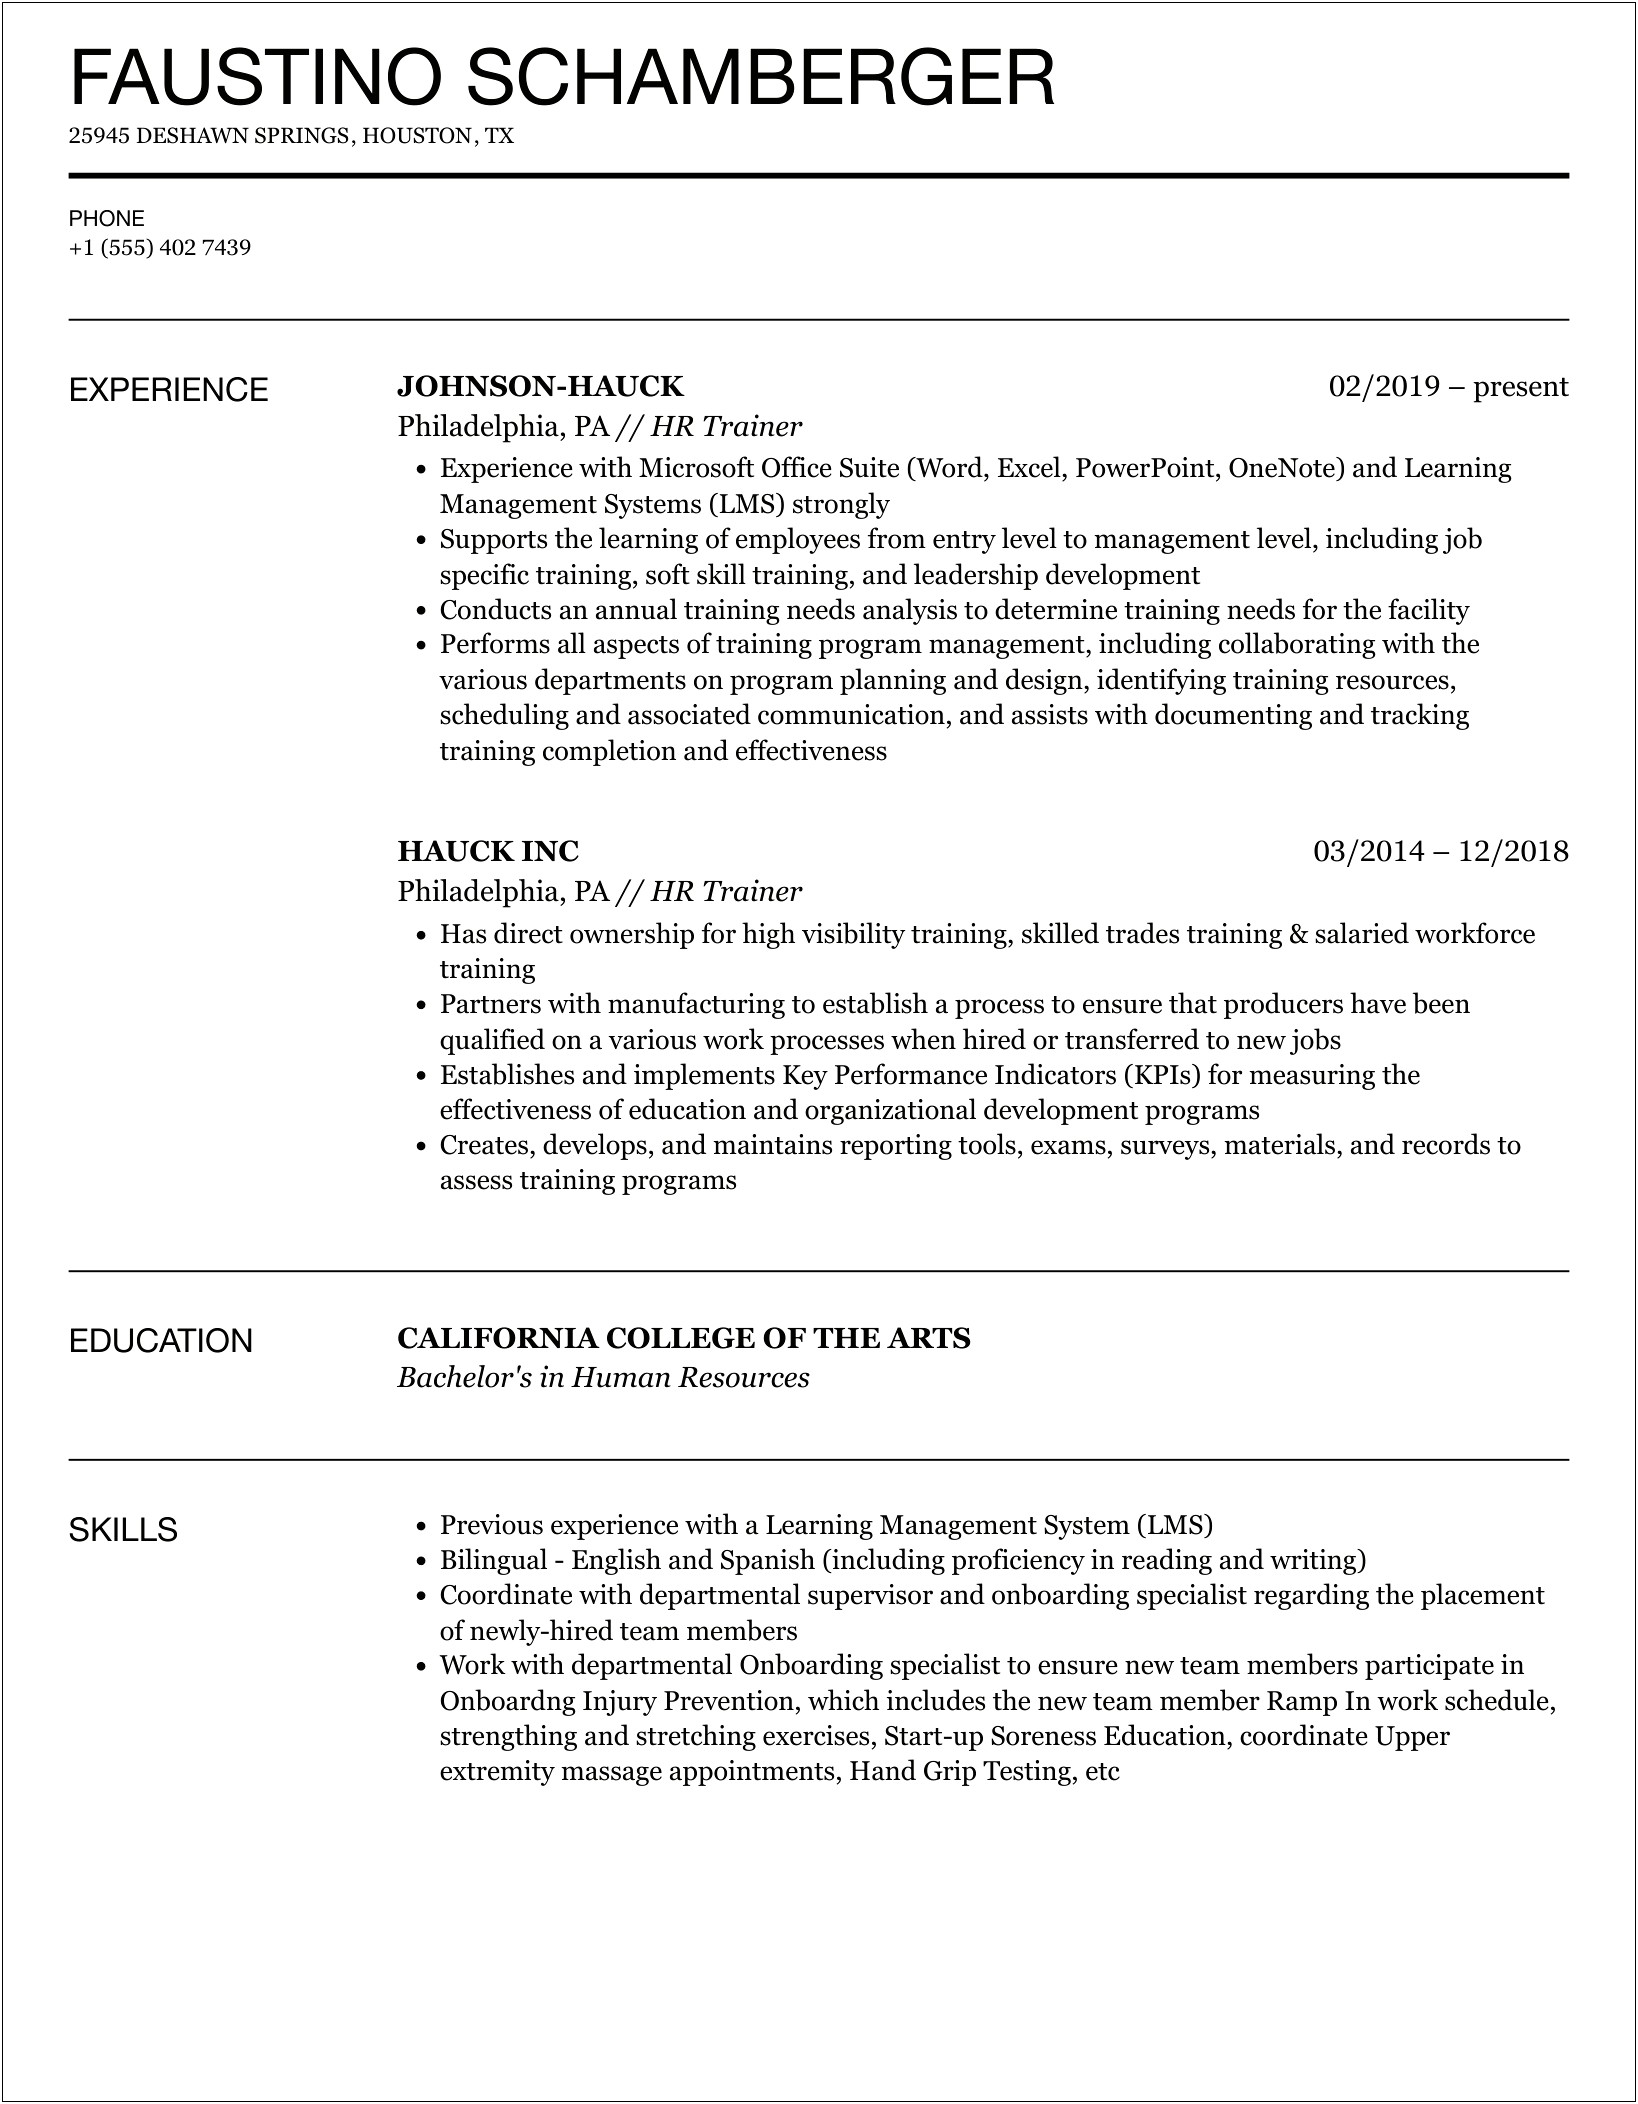 A Good Resume For A Human Resources Trainer